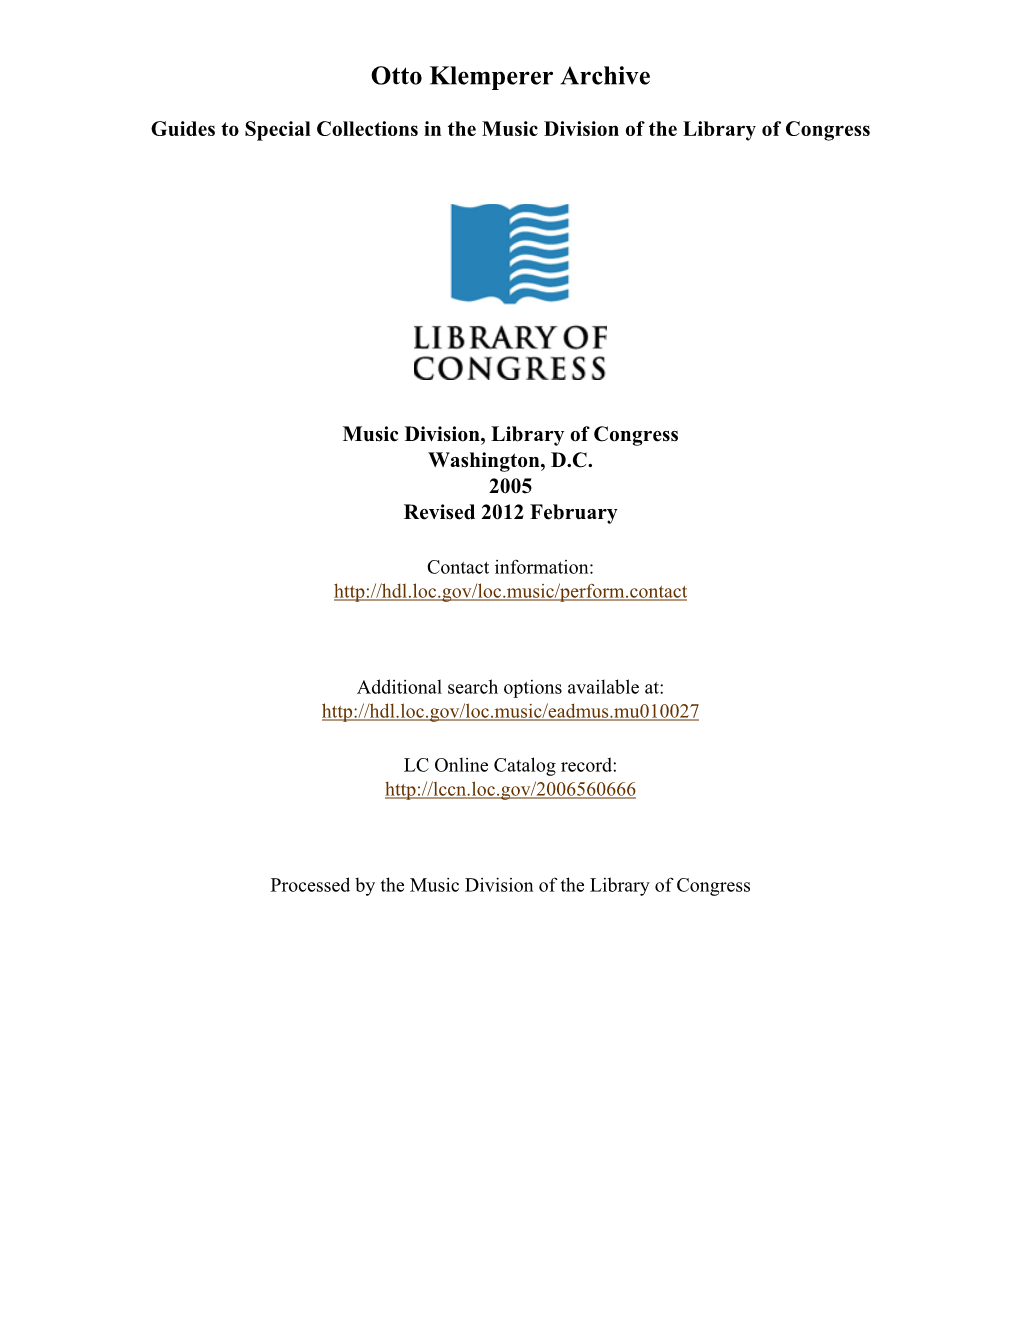 Otto Klemperer Archive [Finding Aid]. Library of Congress. [PDF Rendered